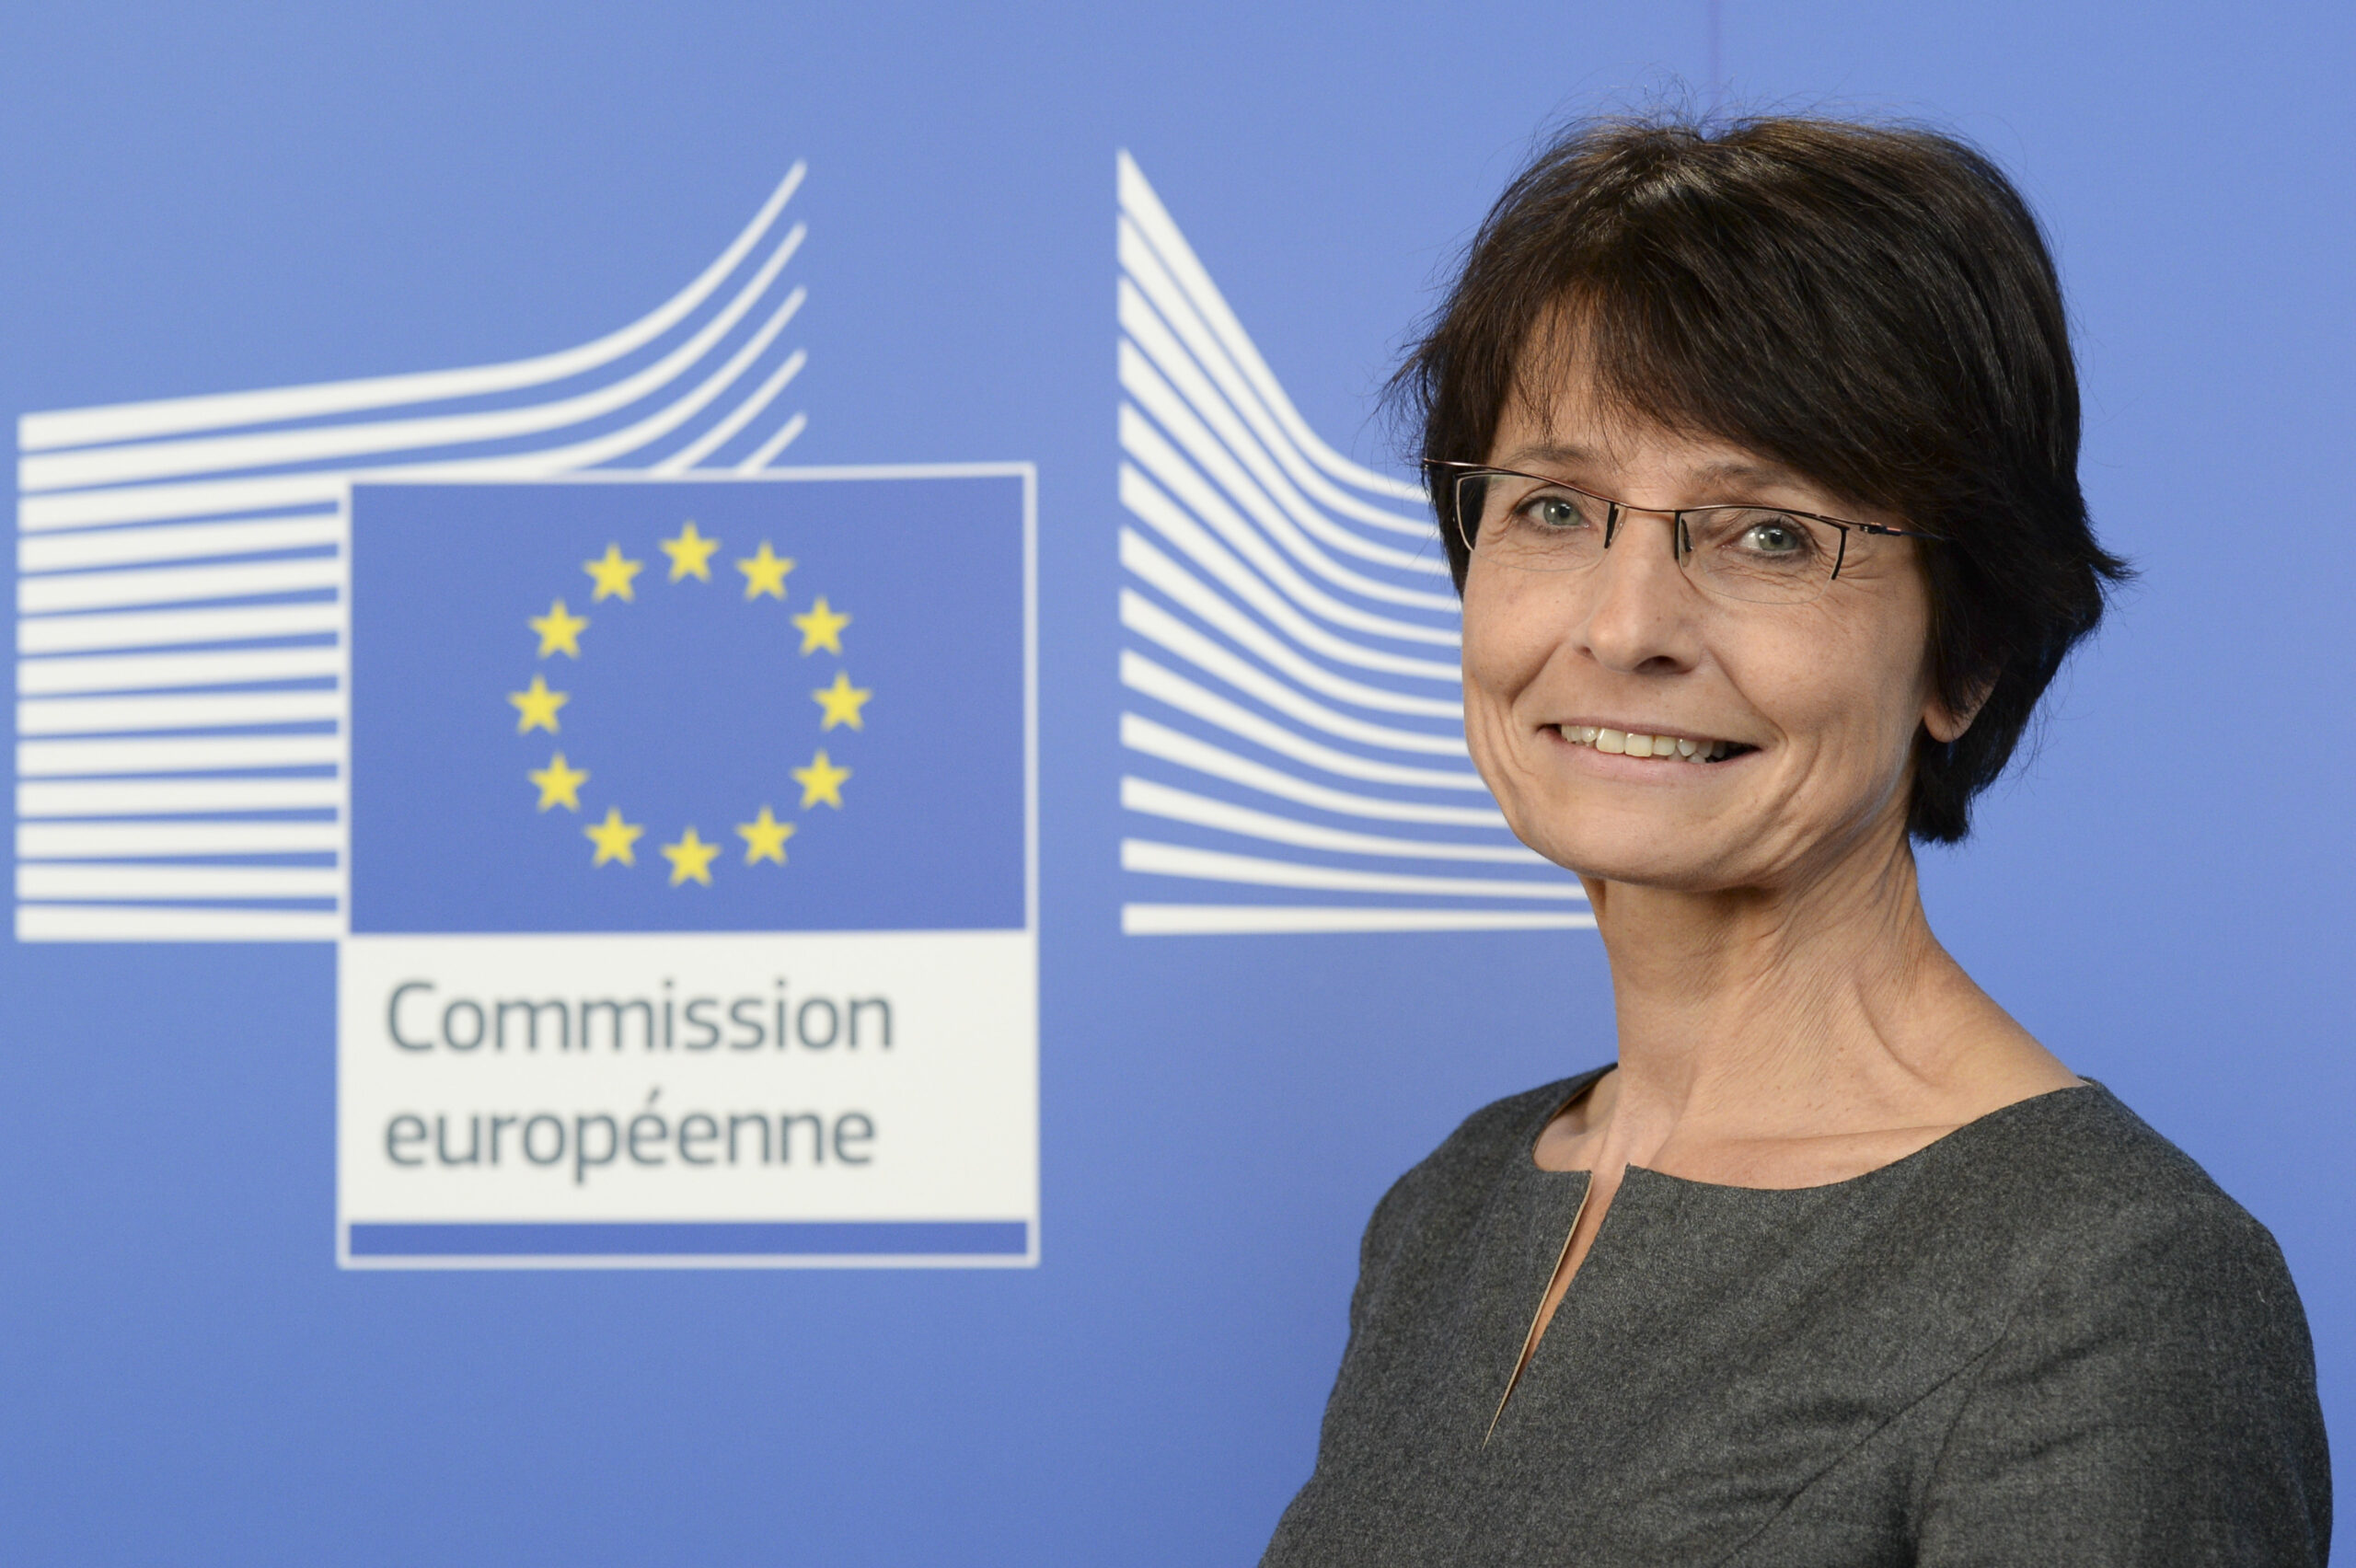 All Together to celebrate the International Women’s Day: Our interview with Commissioner Thyssen on the situation of women in politics and in the labour market